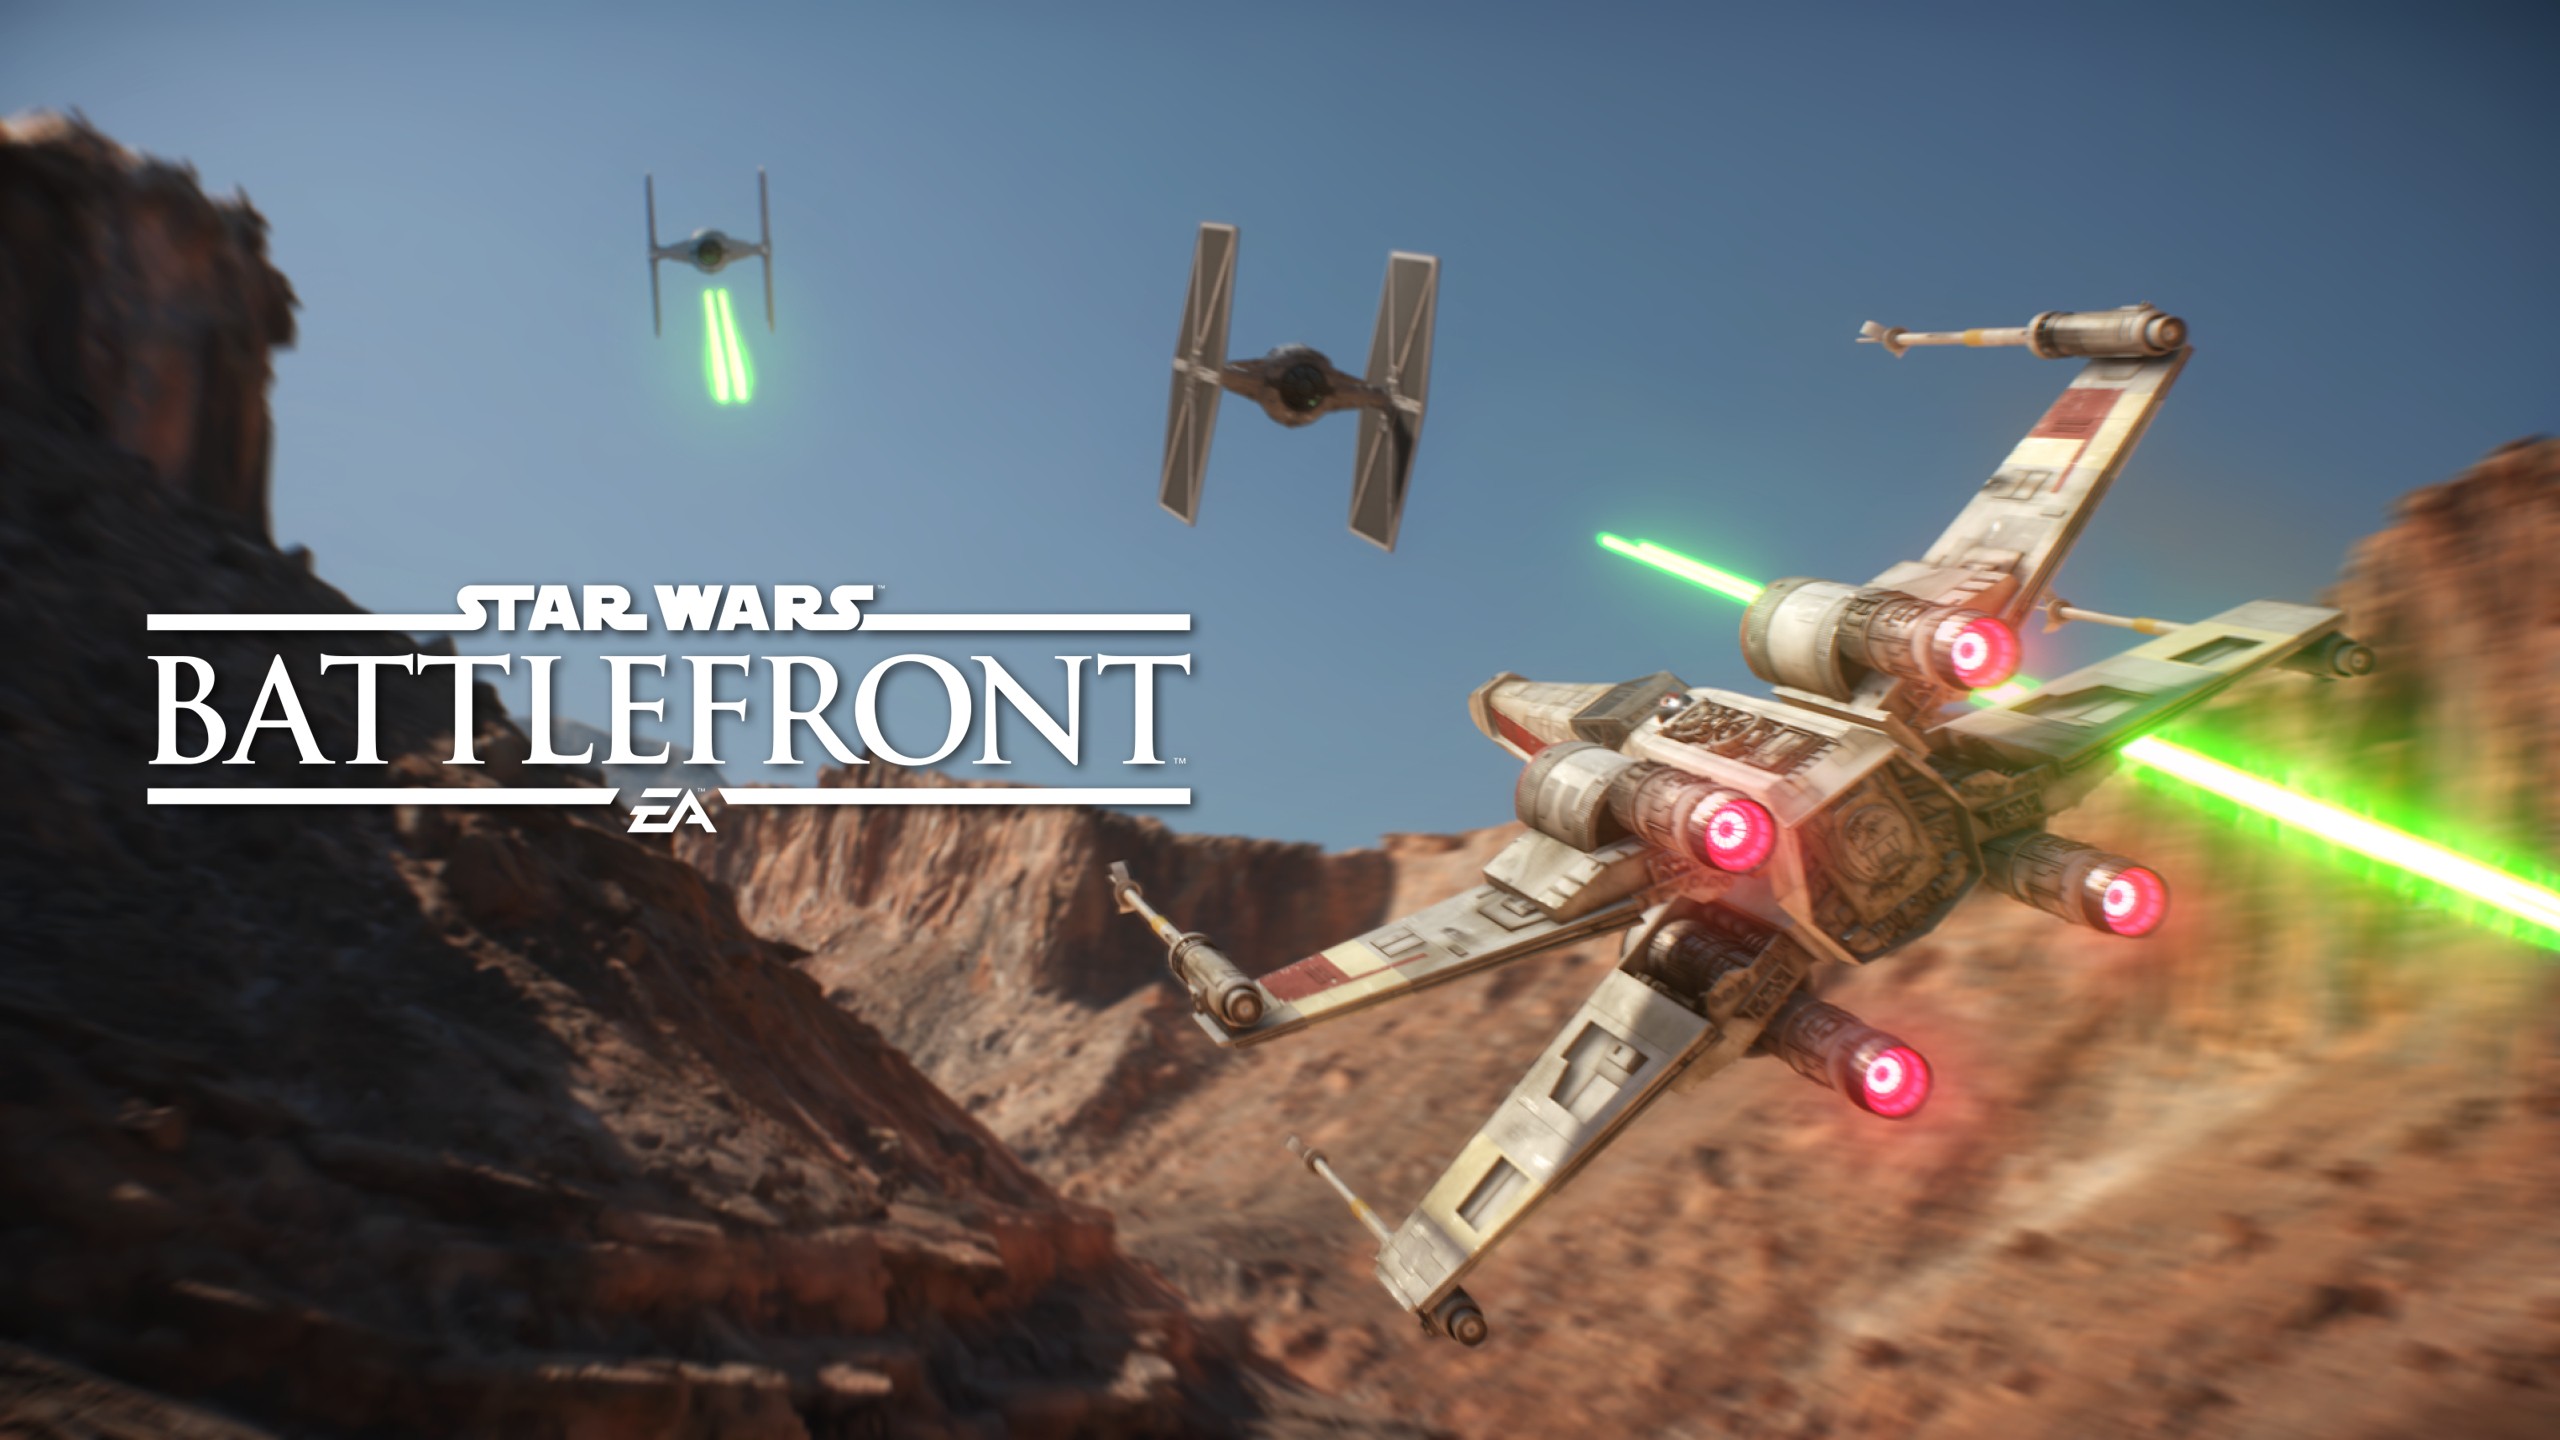 General 2560x1440 Star Wars: Battlefront EA Games PC gaming video games logo text video game art science fiction X-wing TIE Fighter Star Wars Ships Electronic Arts EA DICE